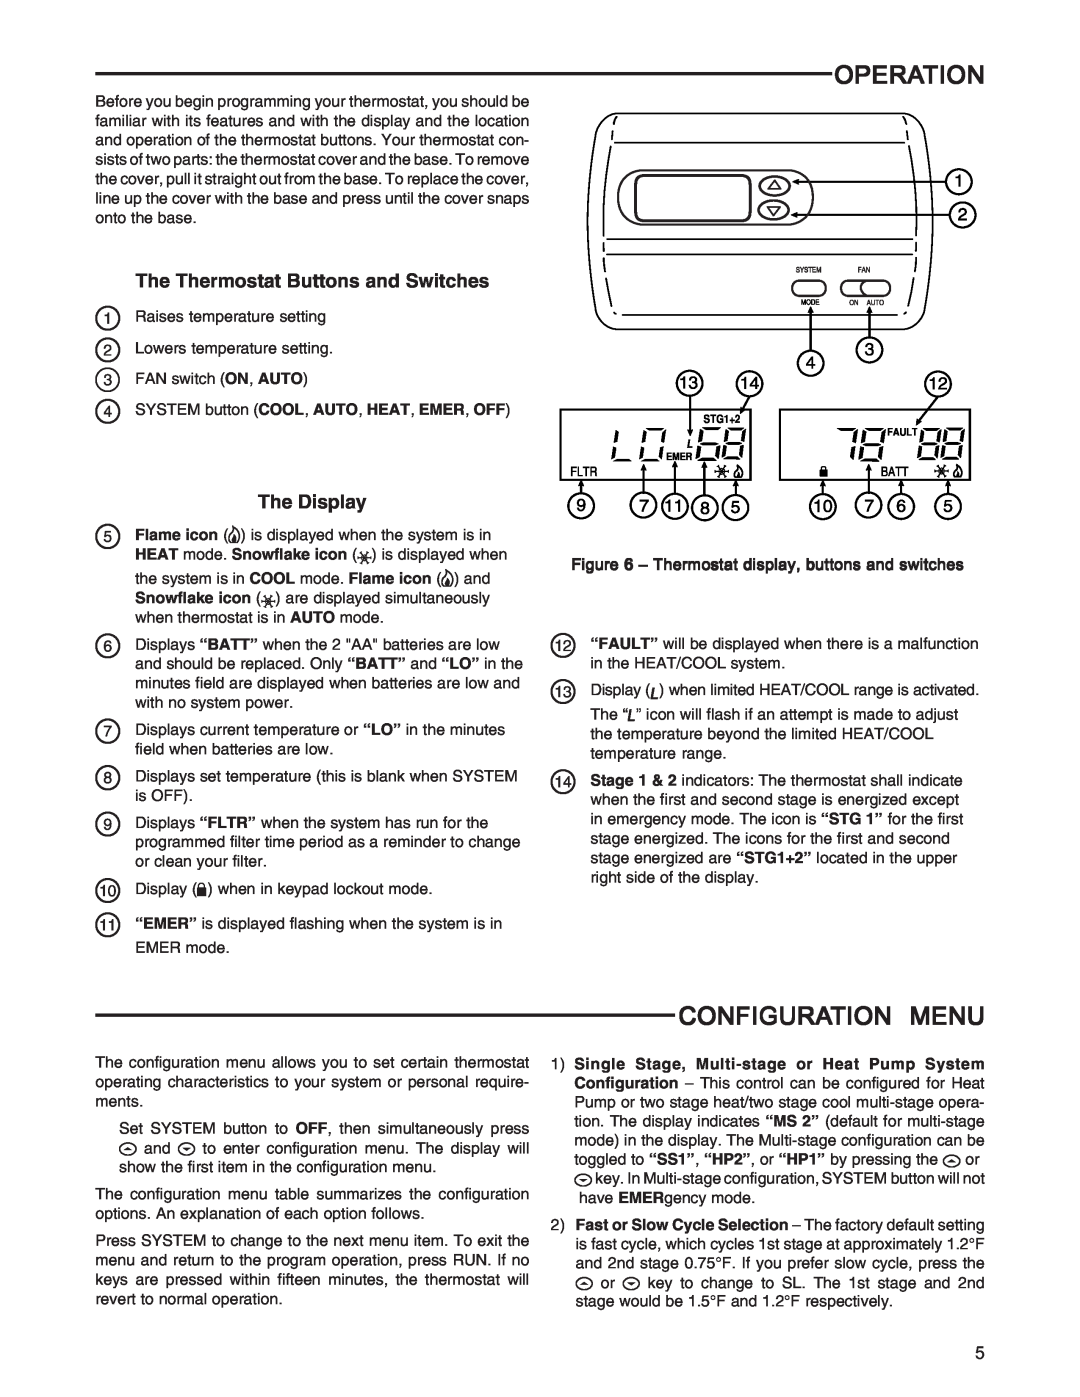 Emerson 1F83-277 installation instructions Operation, Configuration Menu, The Thermostat Buttons and Switches, The Display 